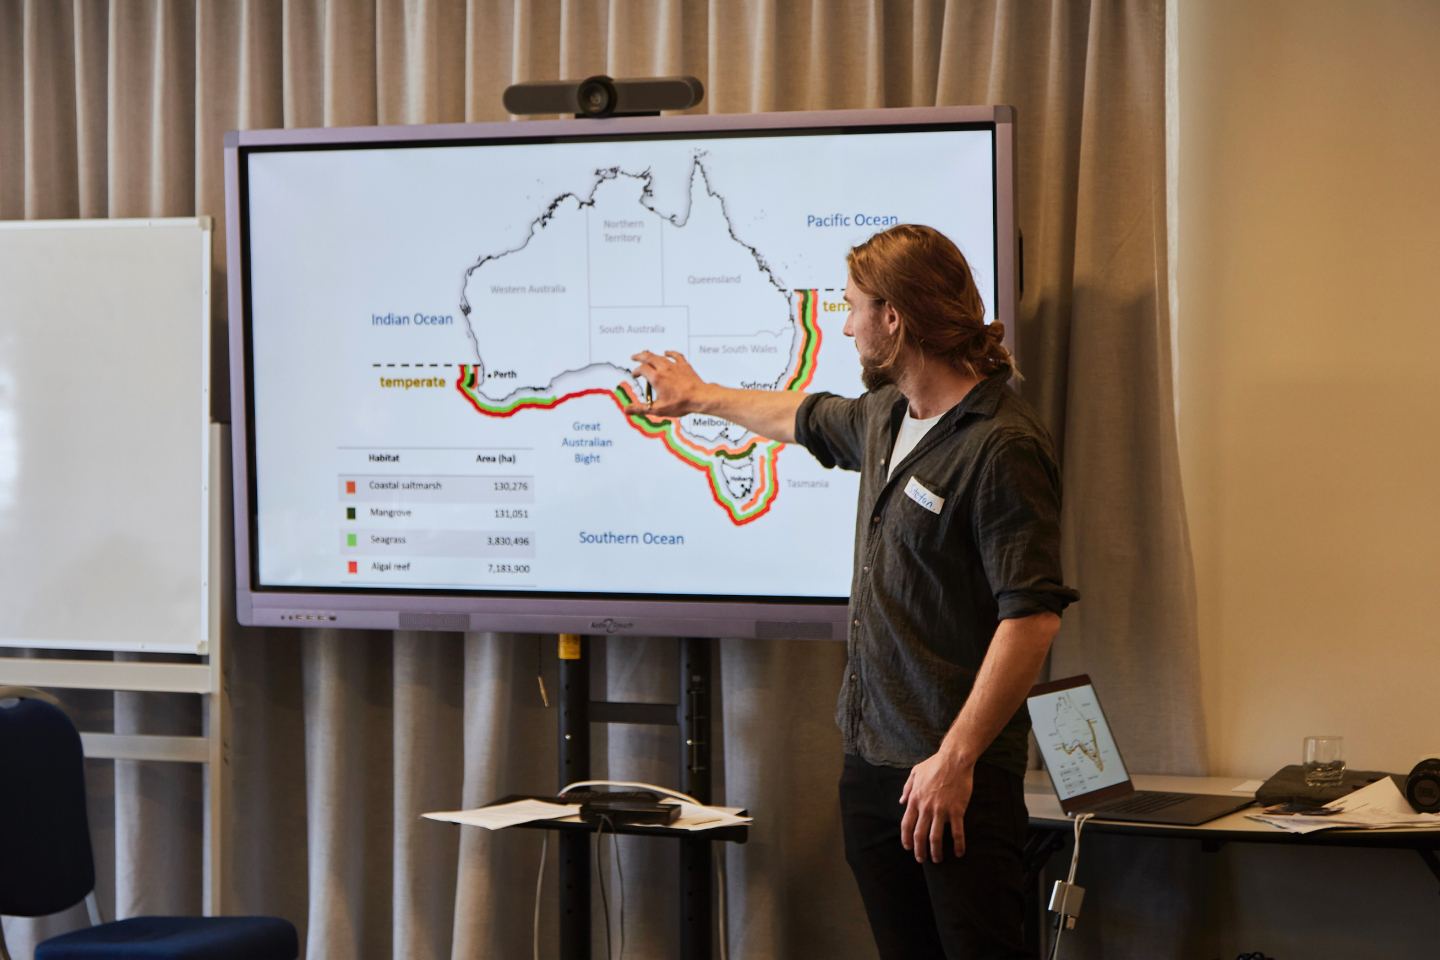 Man pointing out coastal reef features on a projected chart to a room of people